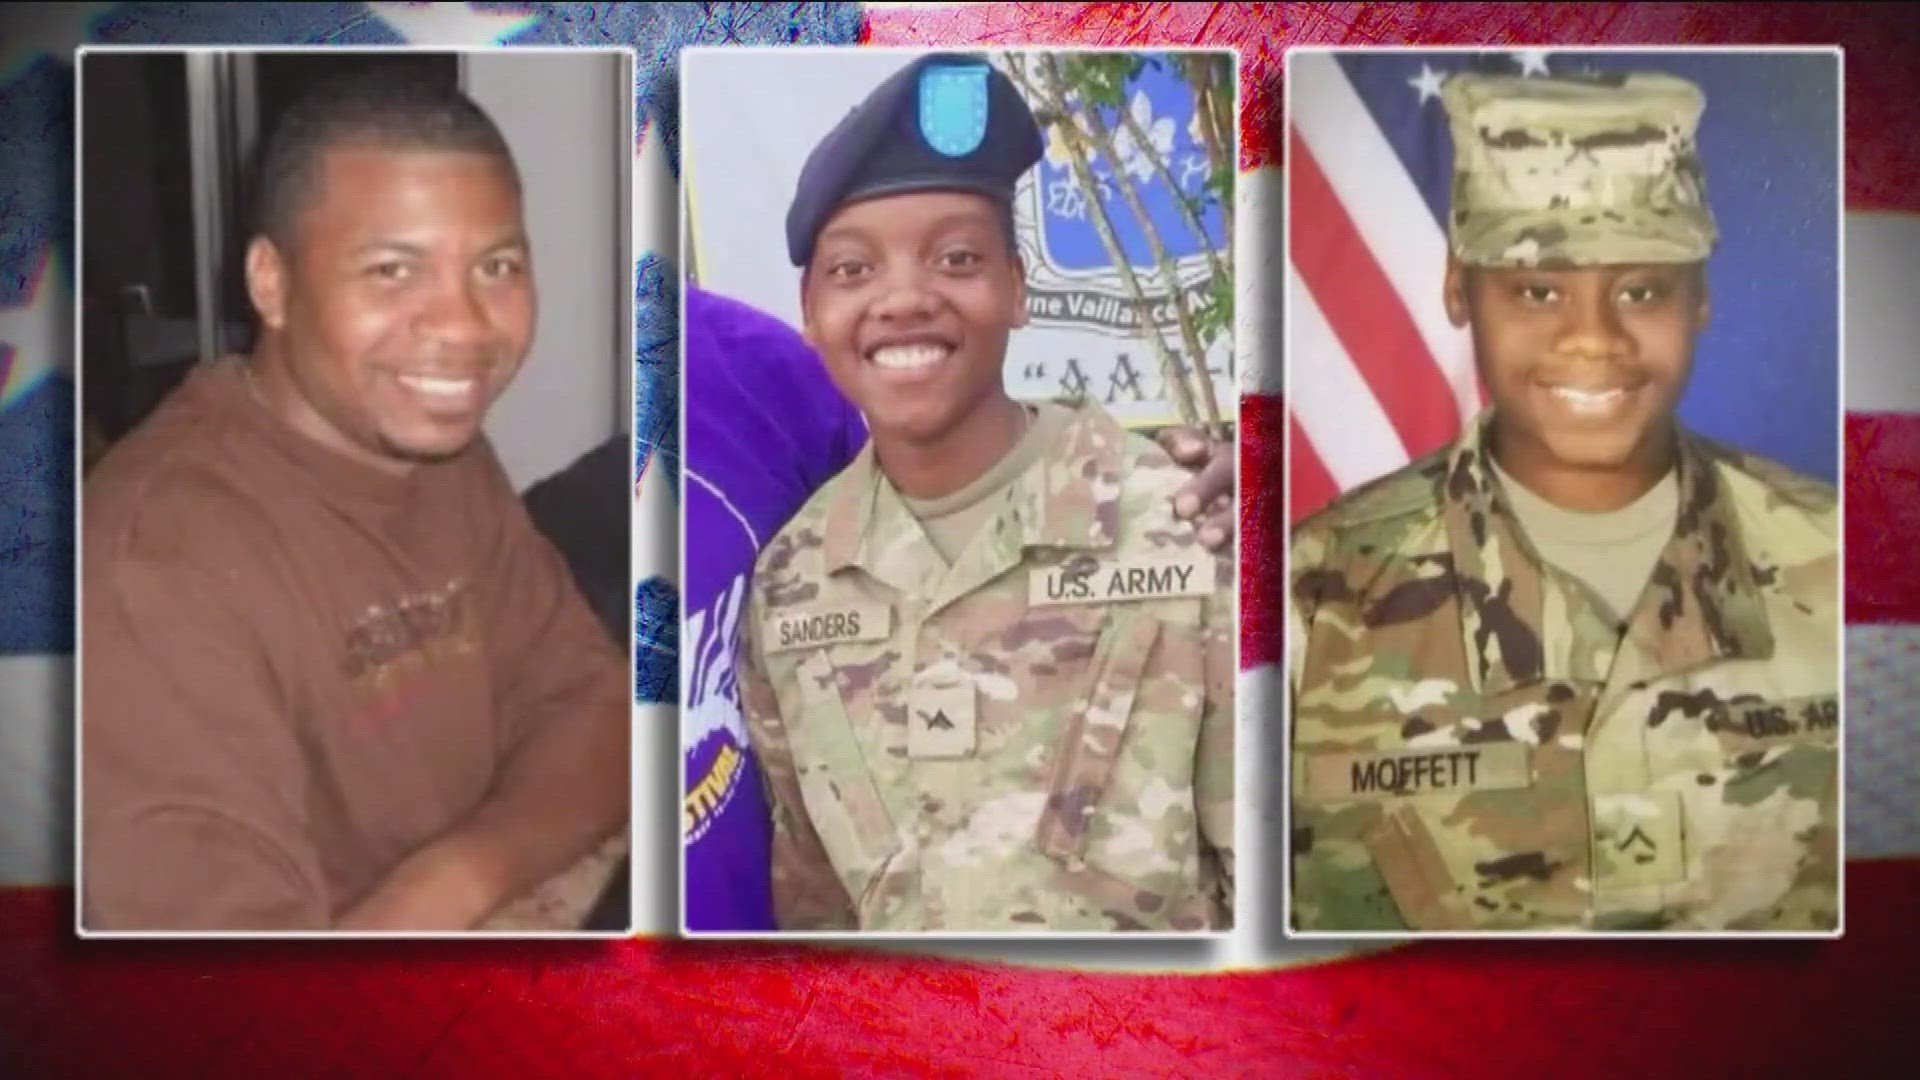 This week the three soldiers killed in a drone attack overseas are returning home in a transfer ceremony.